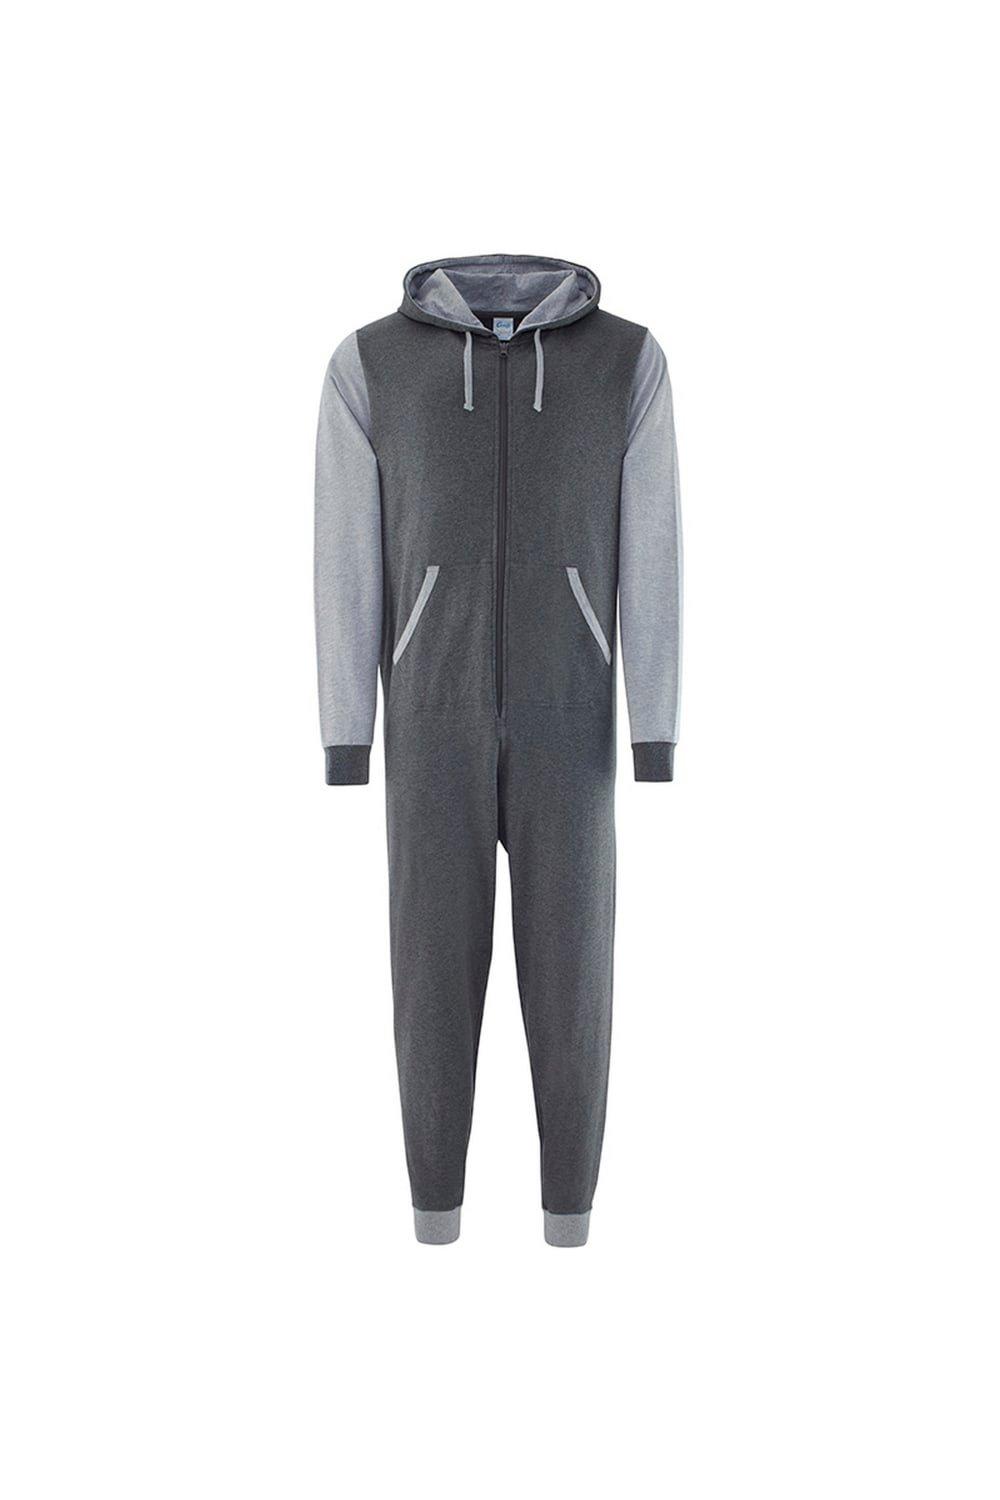 Two Tone Contrast All-In-One Onesie